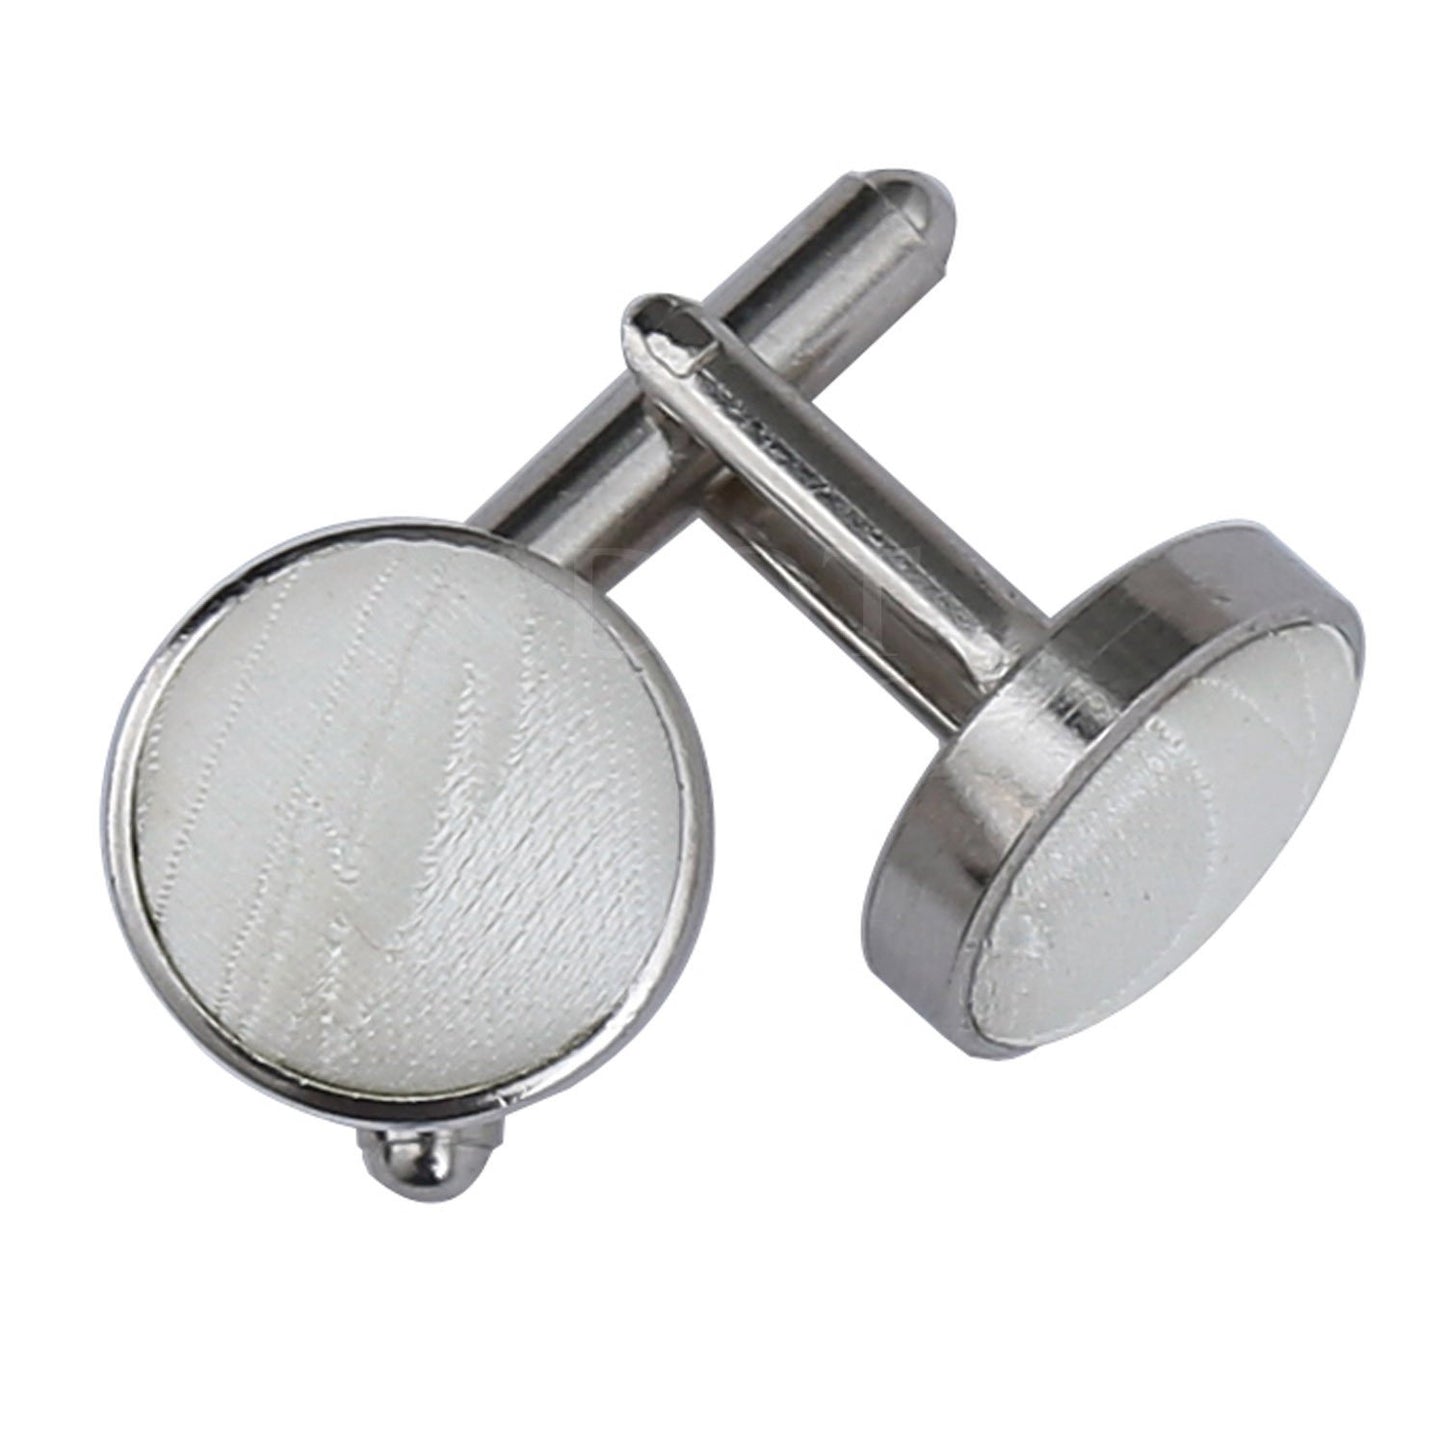 Passion Woven Microfibre Cufflinks for Him - Scarlet Bloom